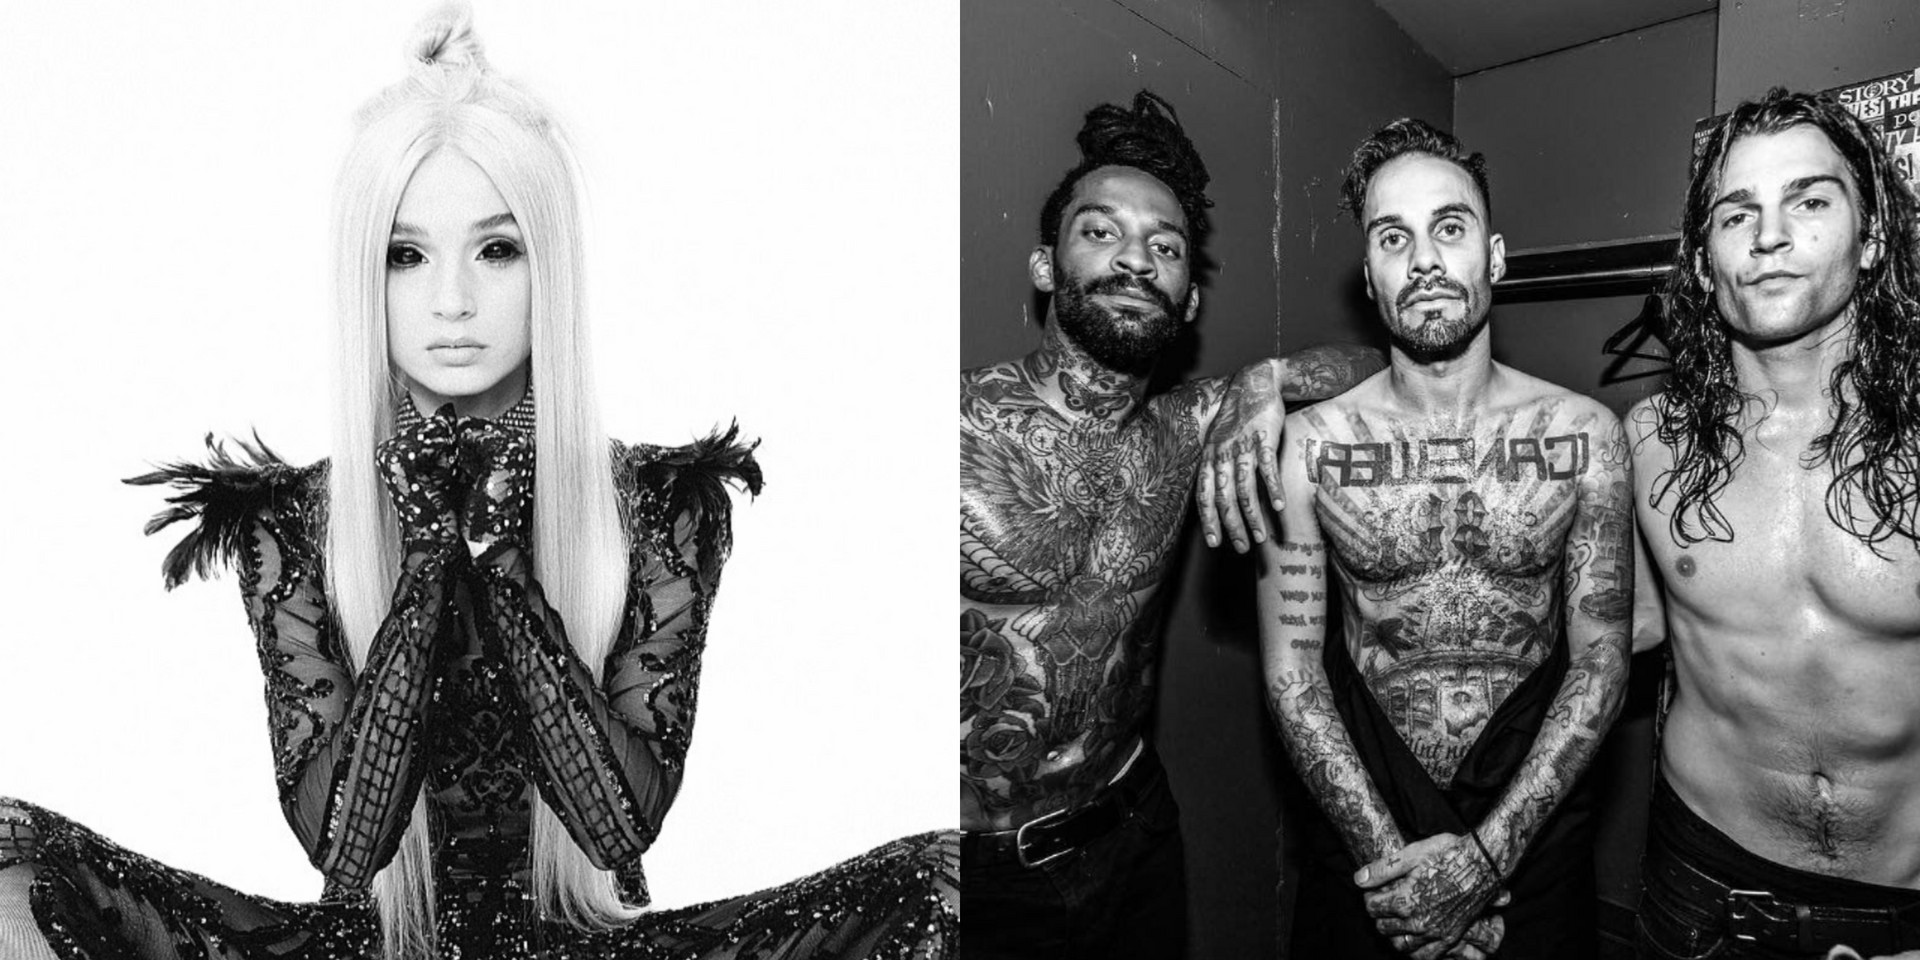 POPPY and Fever 333 collaborate on heavy, perplexing track, 'Scary Mask' – listen 